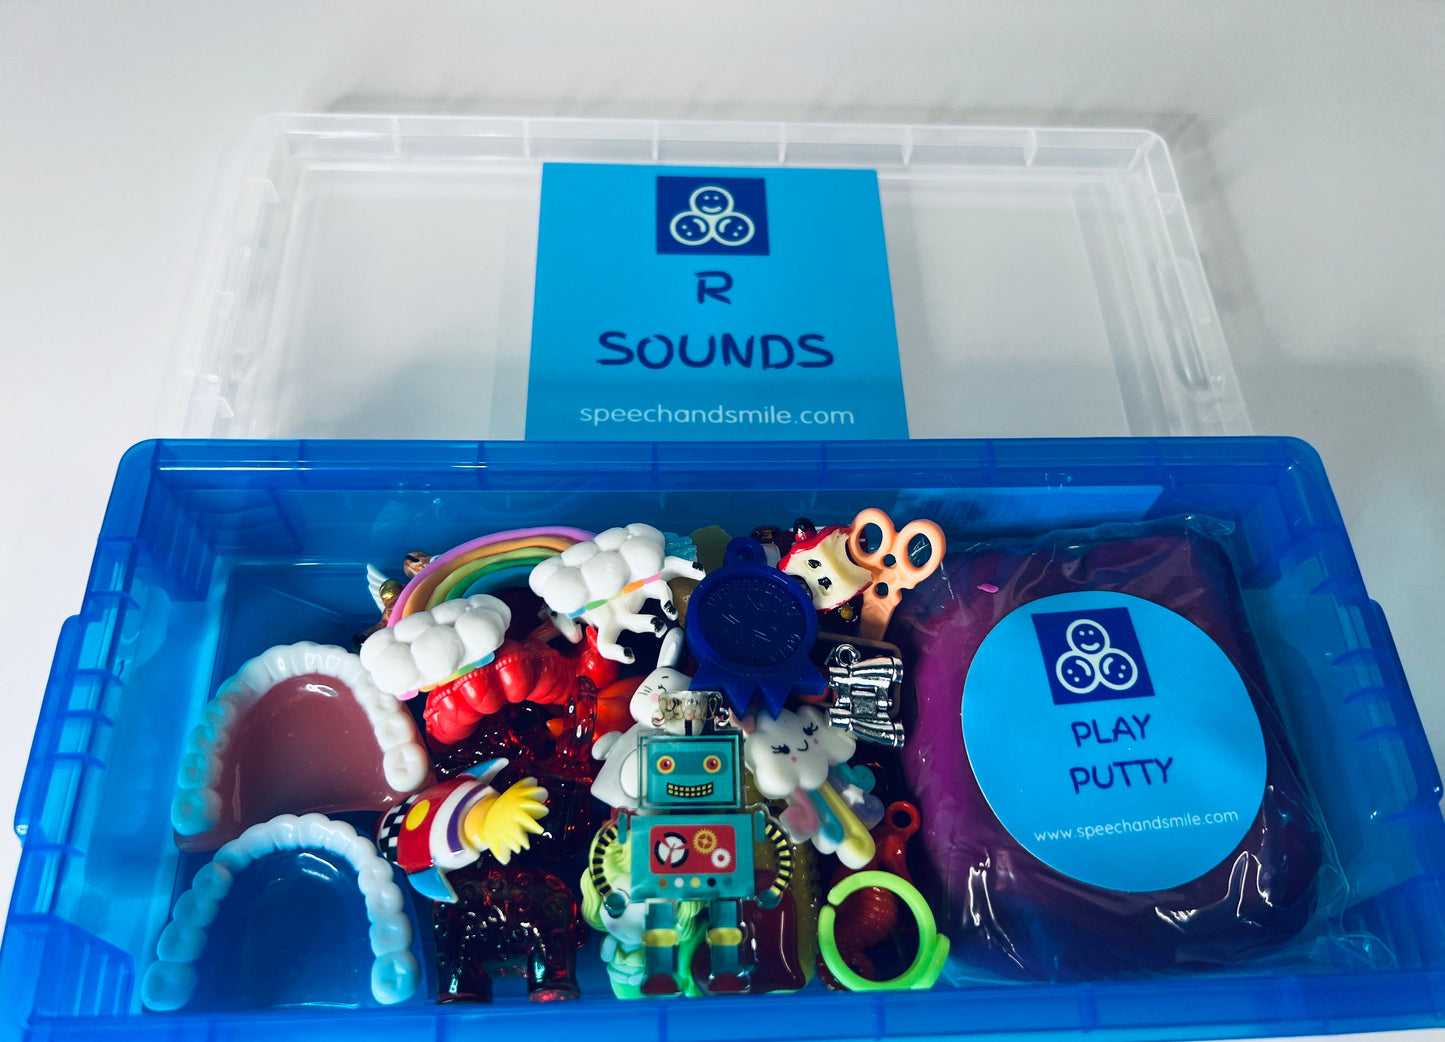 R Sound Objects Kit with Mouth Model-R Mini Objects for Speech Therapy-